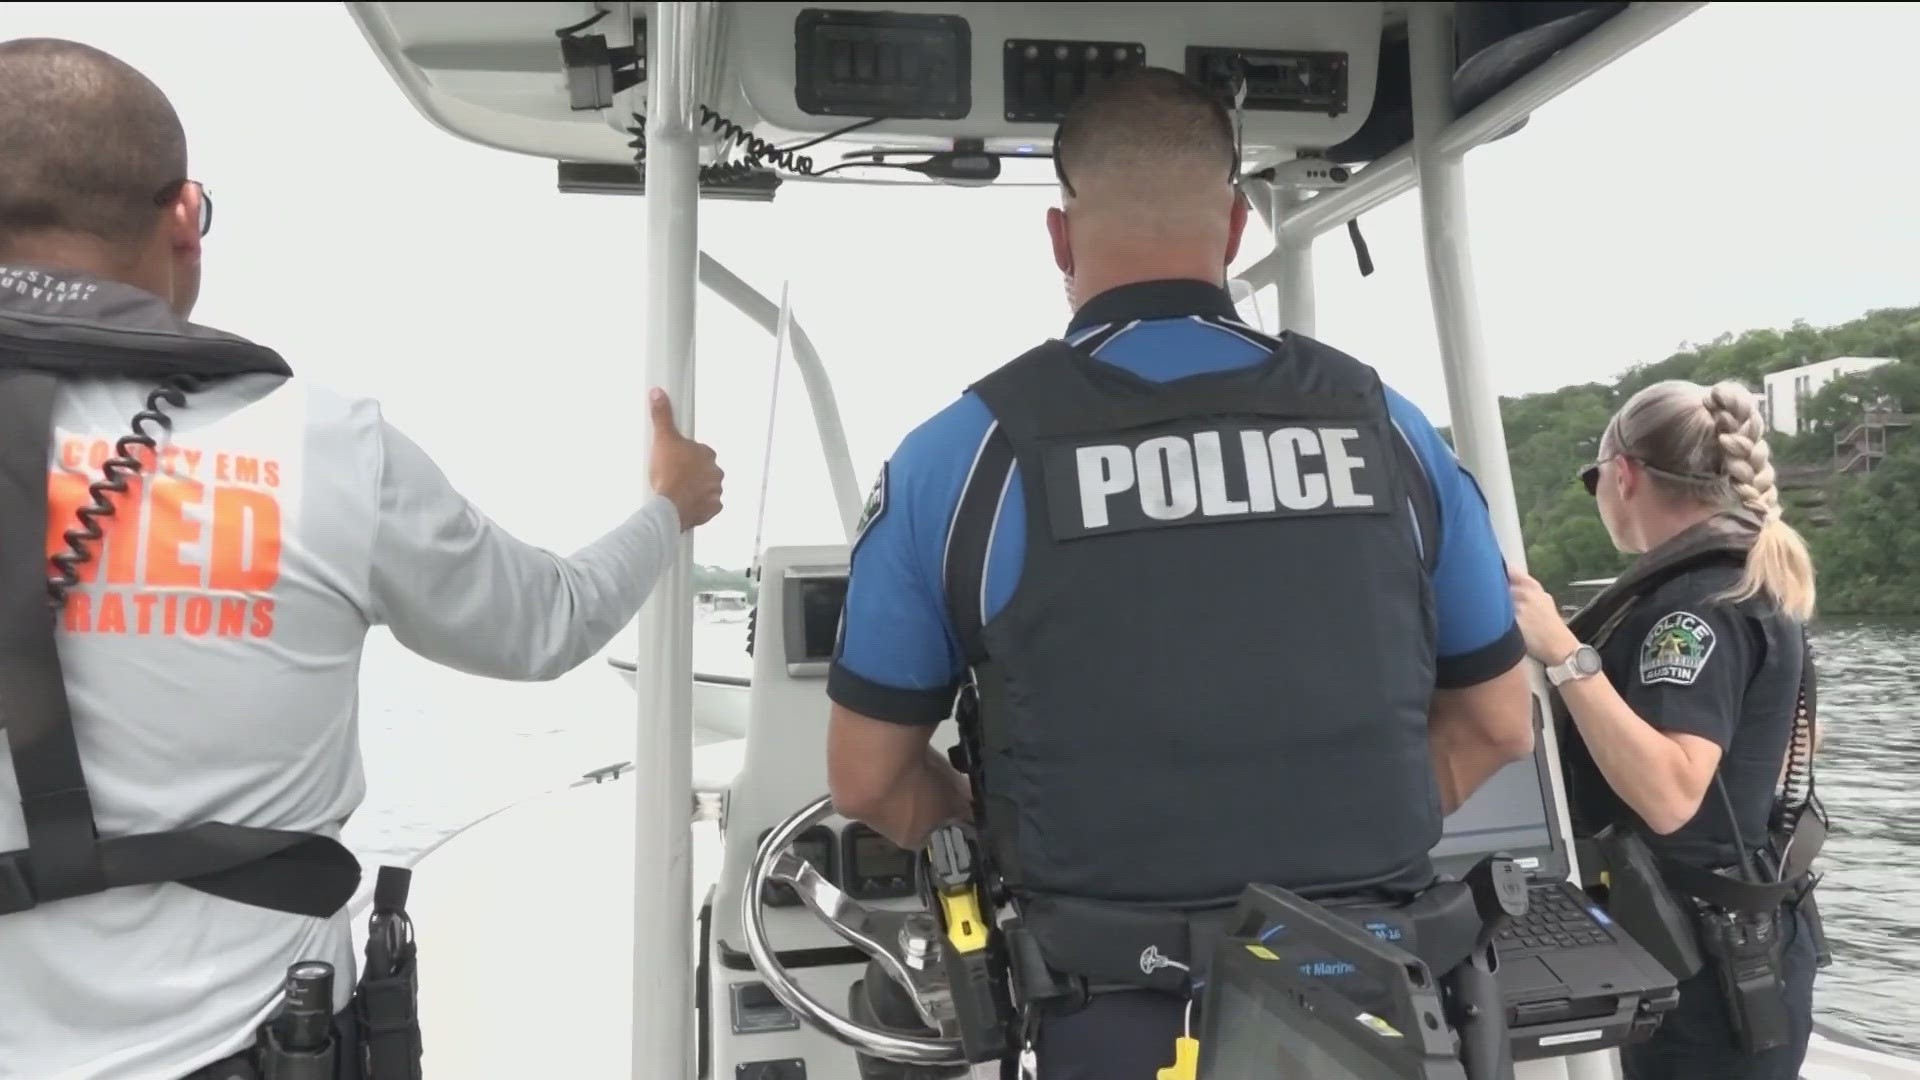 The increased boat traffic on lakes has led to a partnership between first responders in an effort to quickly attend to emergencies.